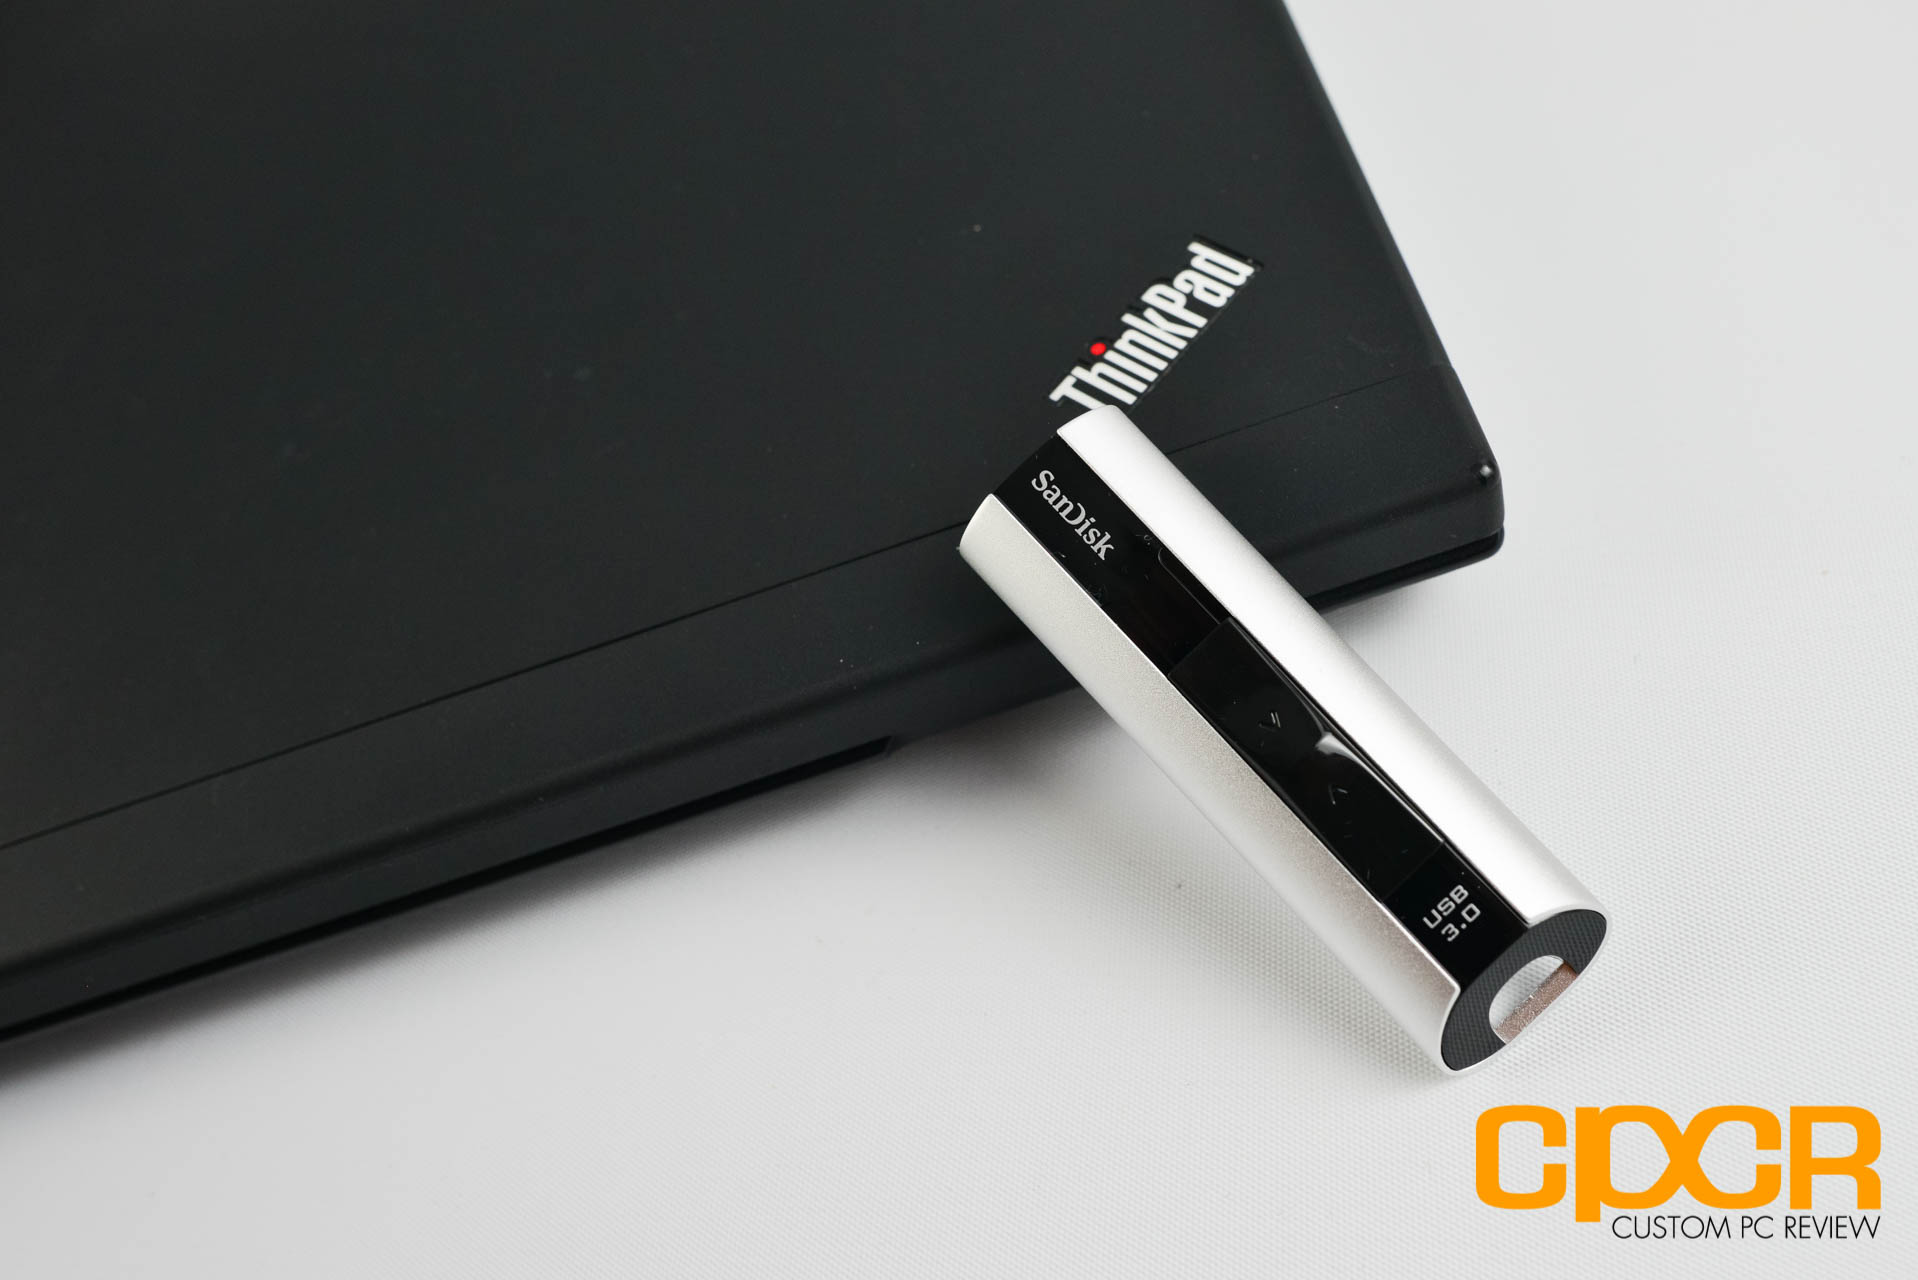 Pretty rod fluctuate Review: SanDisk Extreme PRO 128GB USB 3.0 Flash Drive - Custom PC Review